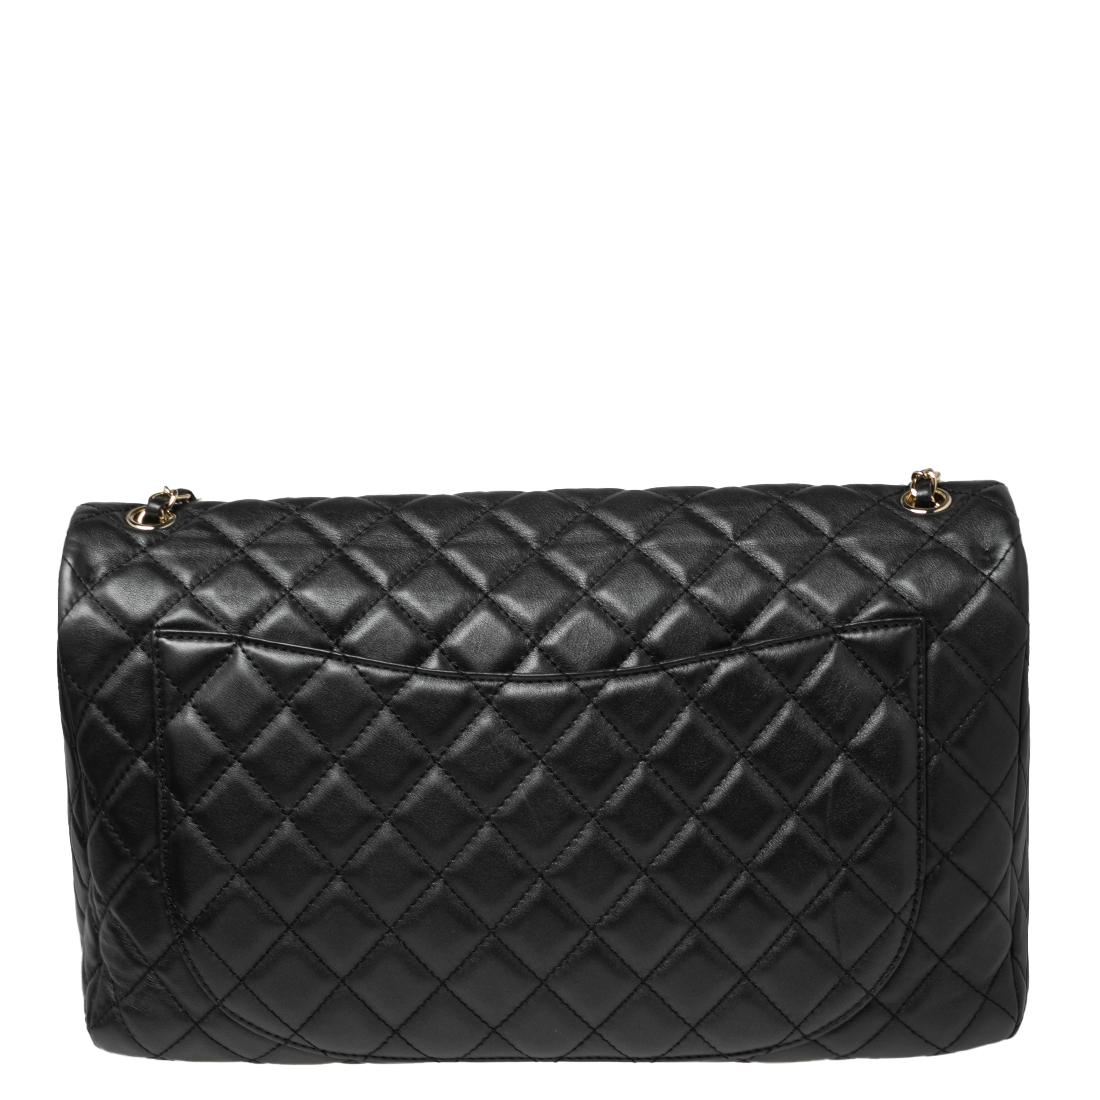 We are in utter awe of this flap bag from Chanel as it is appealing in a surreal way. Exquisitely crafted from leather in their quilt design, it bears its signature label on the fabric interior and the iconic CC turn-lock on the flap. The piece has